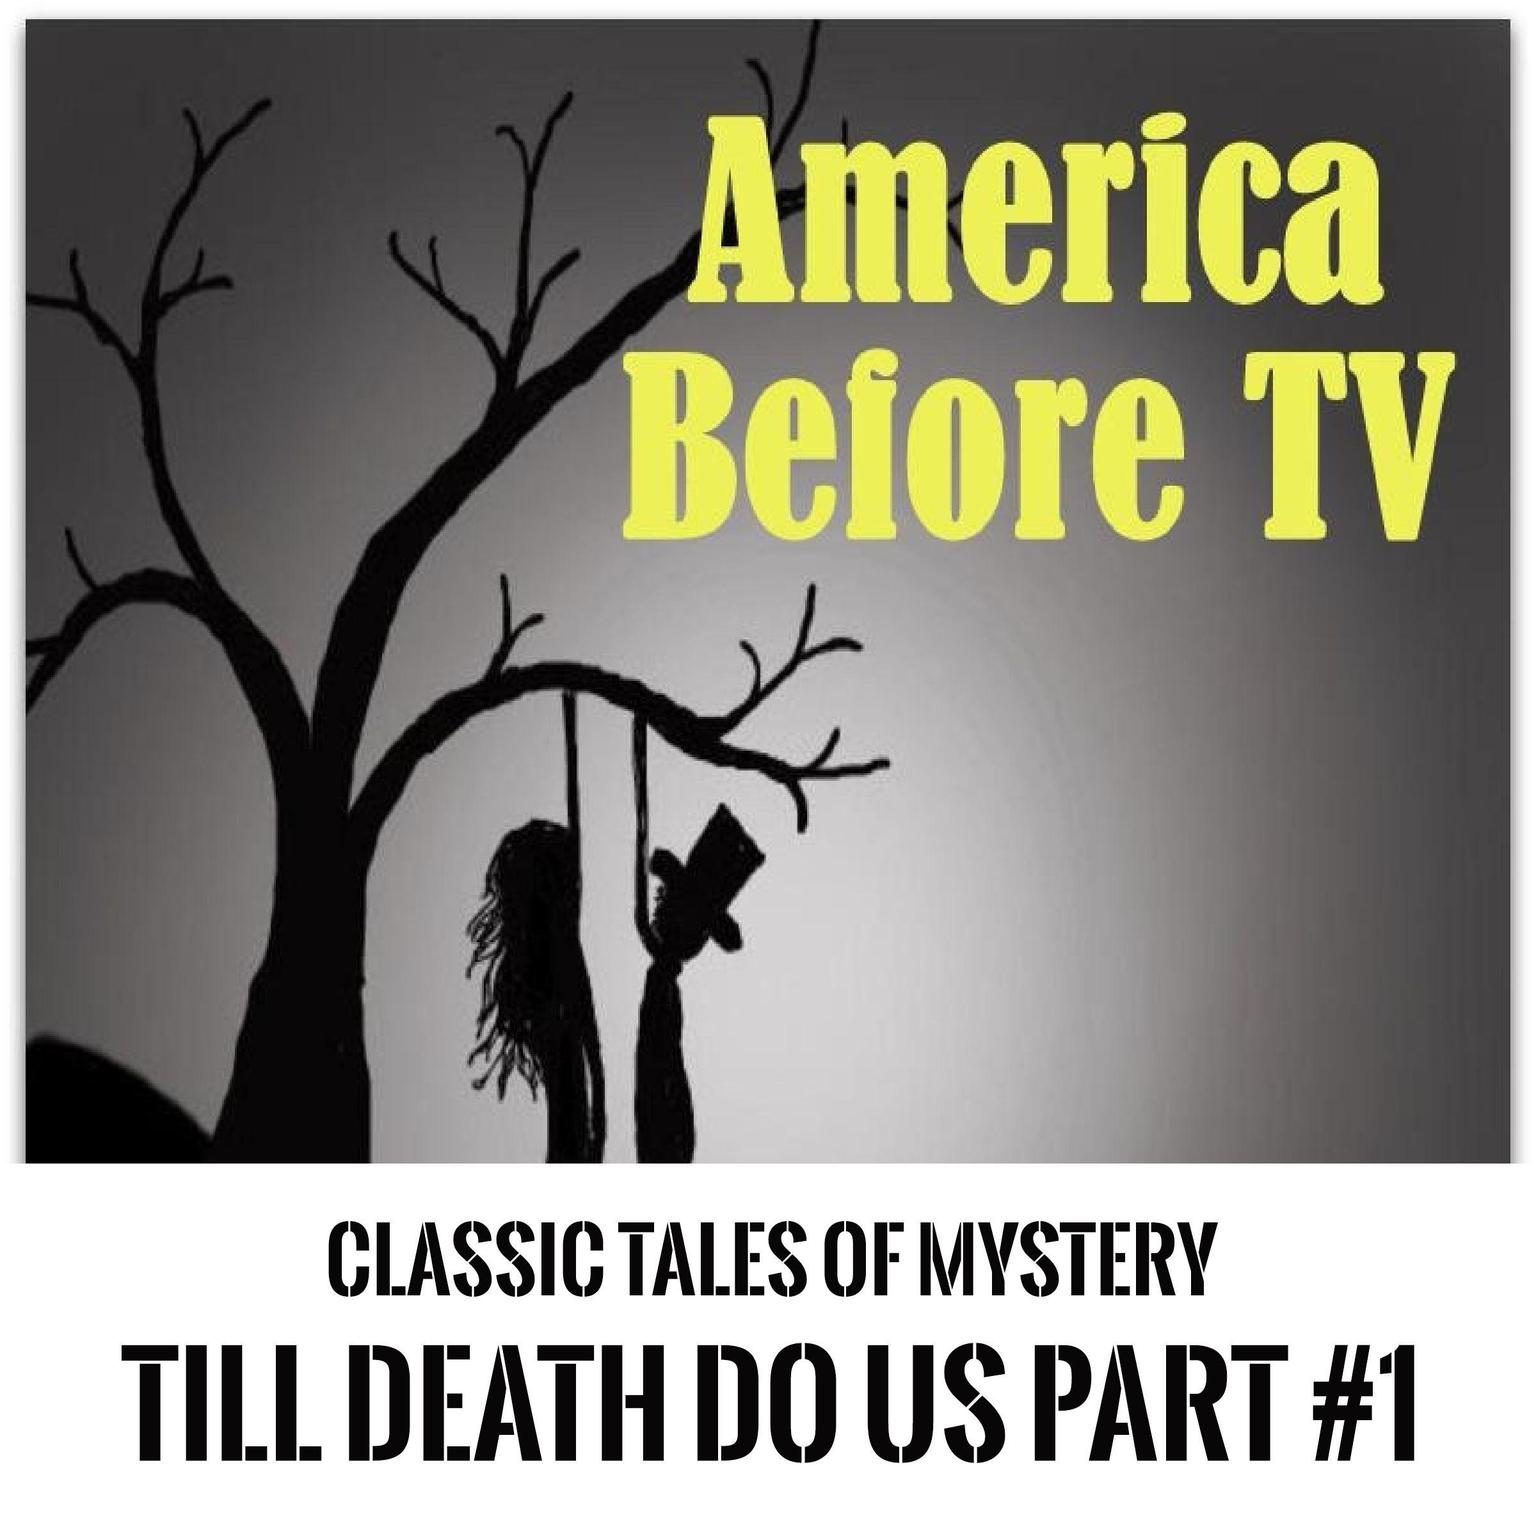 America Before TV - Til Death Do Us Part  #1 (Abridged) Audiobook, by Classic Tales of Mystery